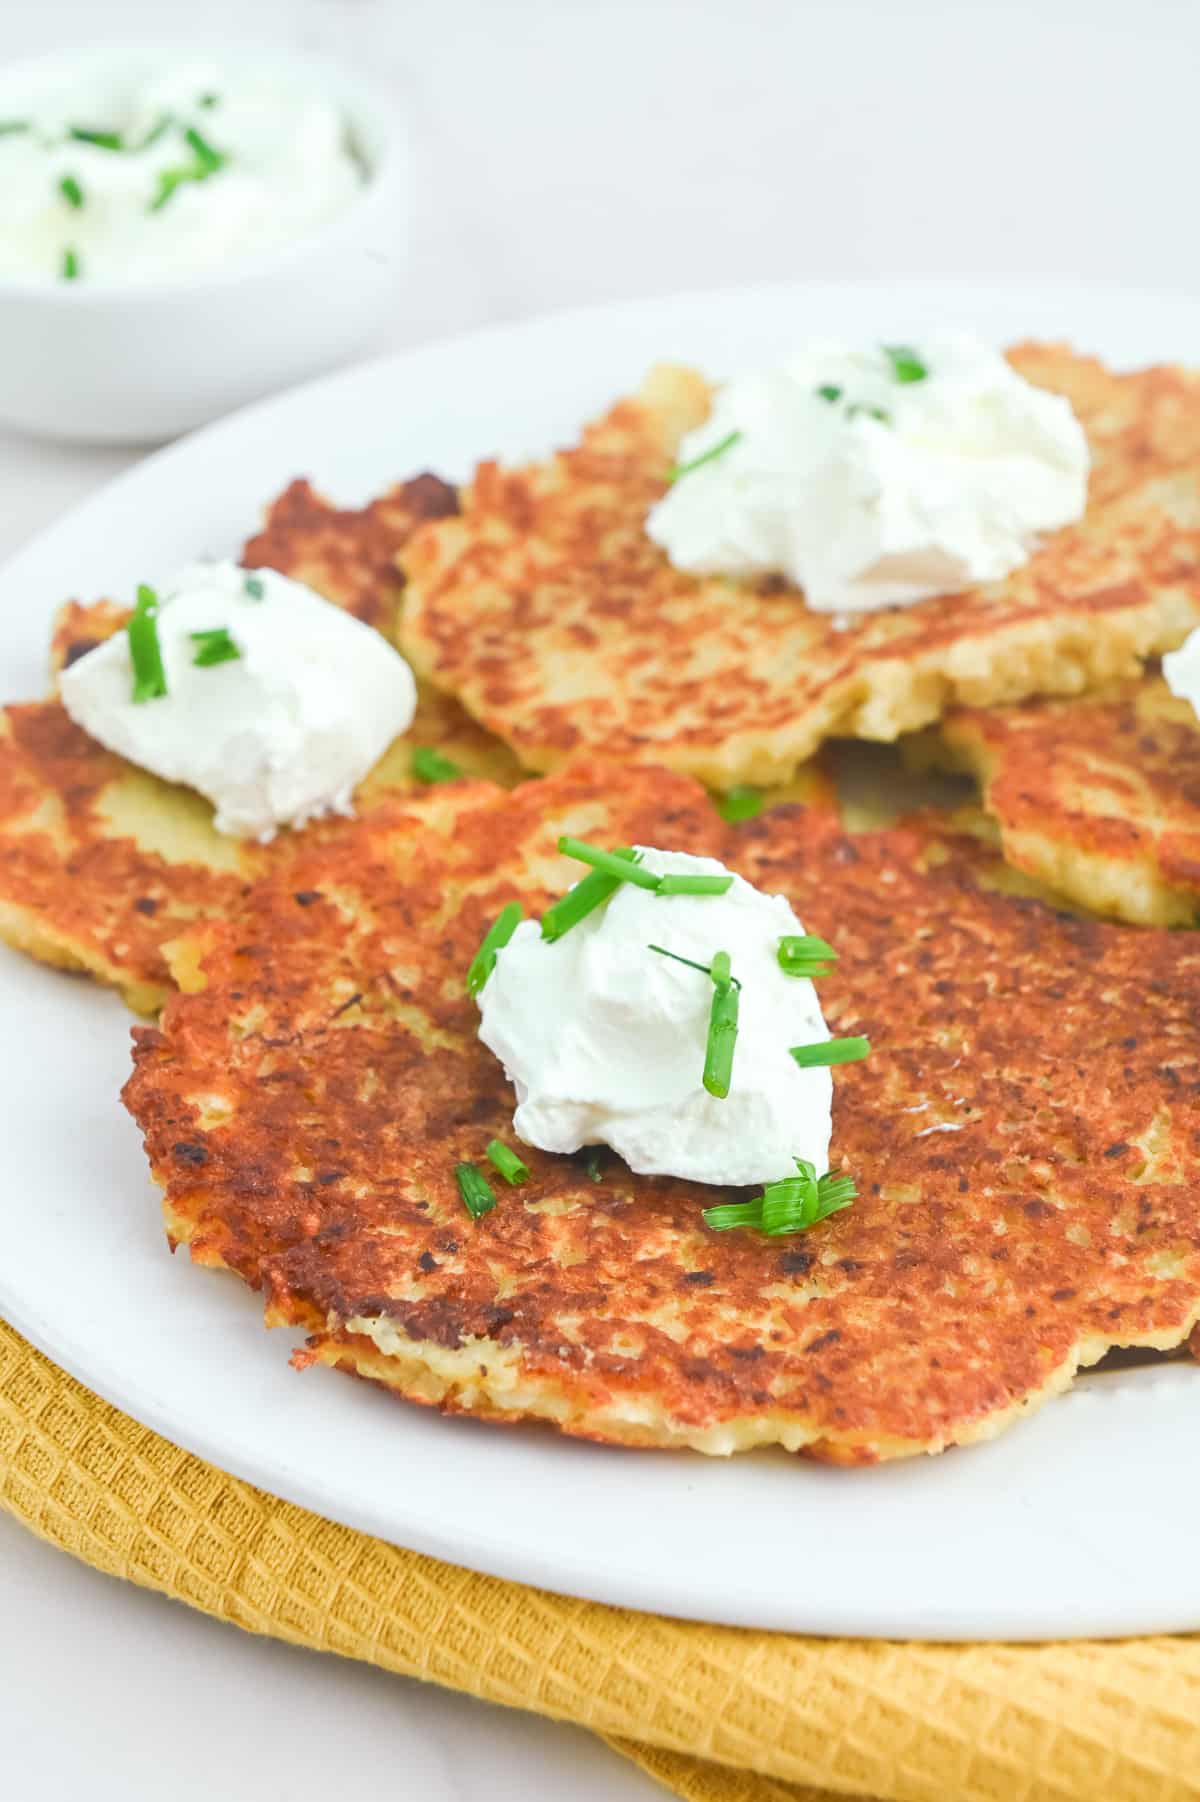 Potato pancakes with sour cream and chives on a plate.